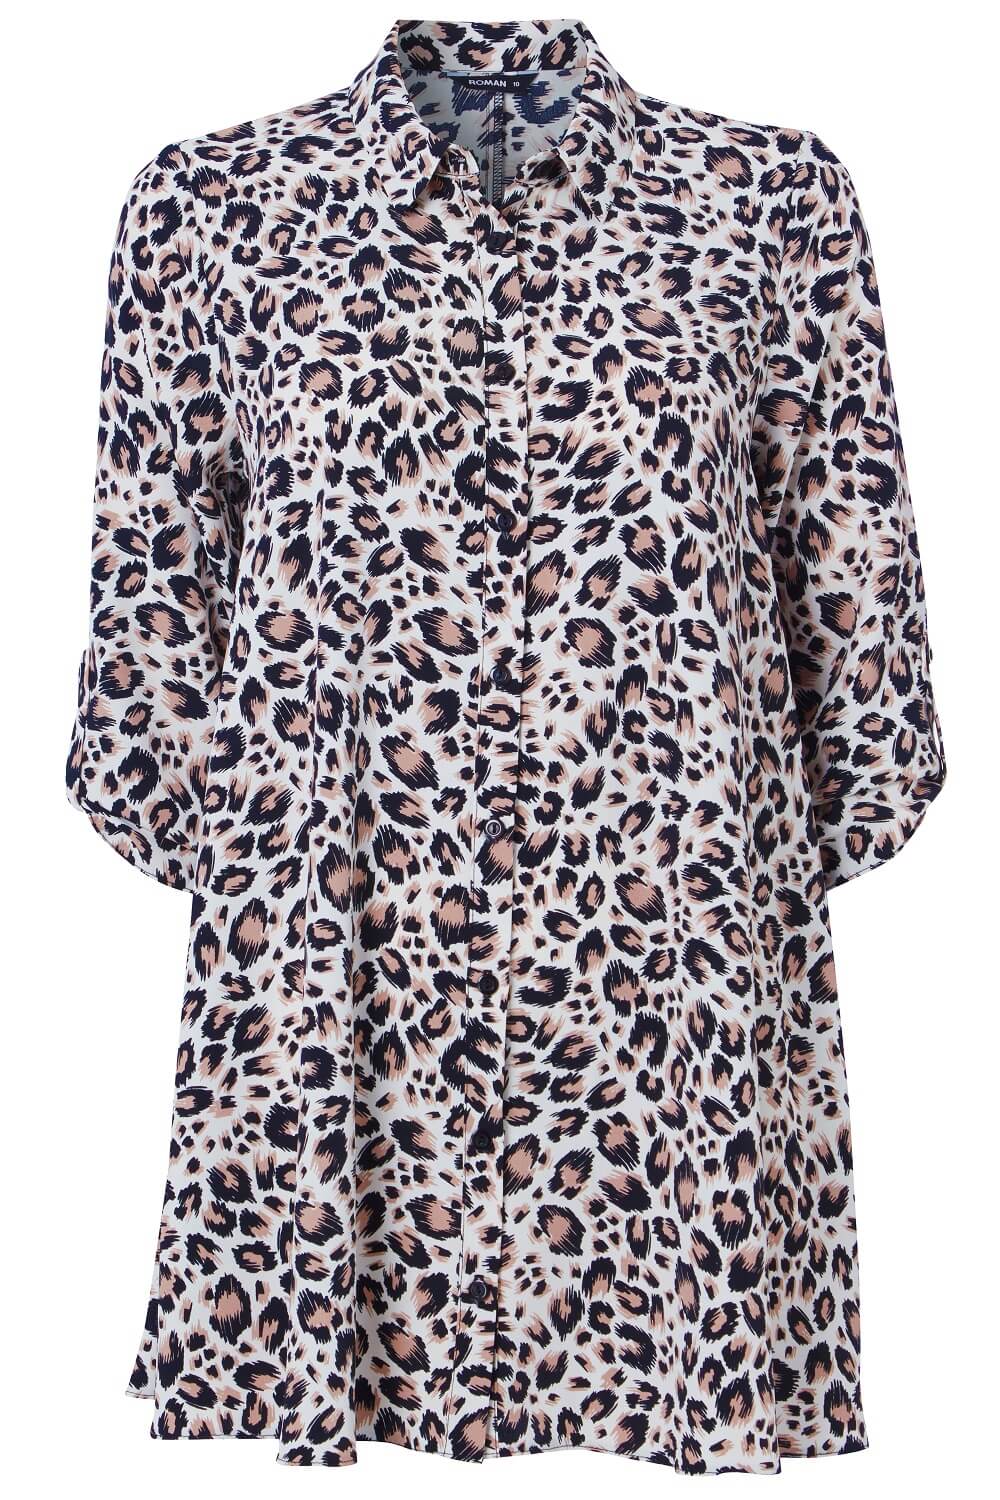 Brown Leopard Print Tunic Blouse, Image 4 of 8